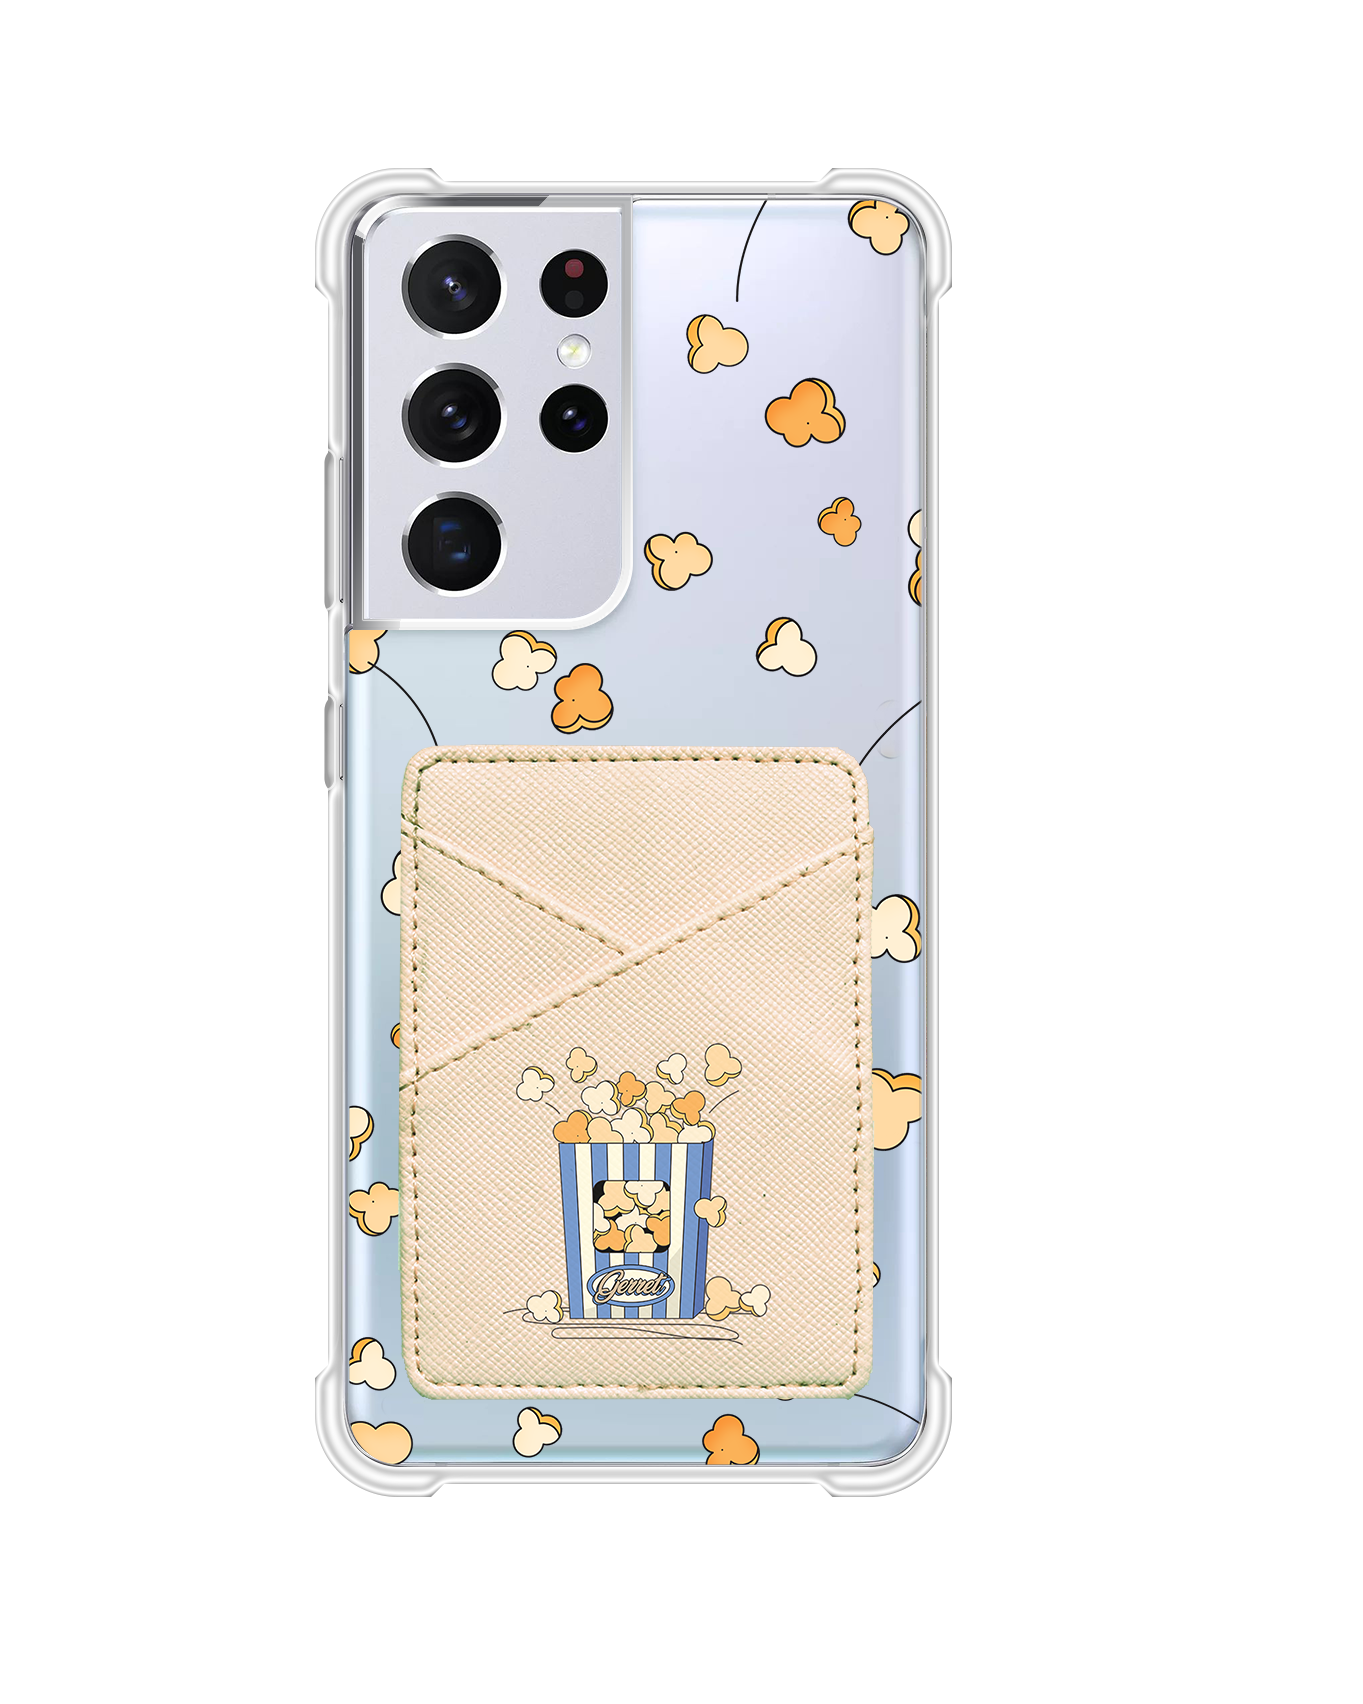 Android Phone Wallet Case - Popcorn